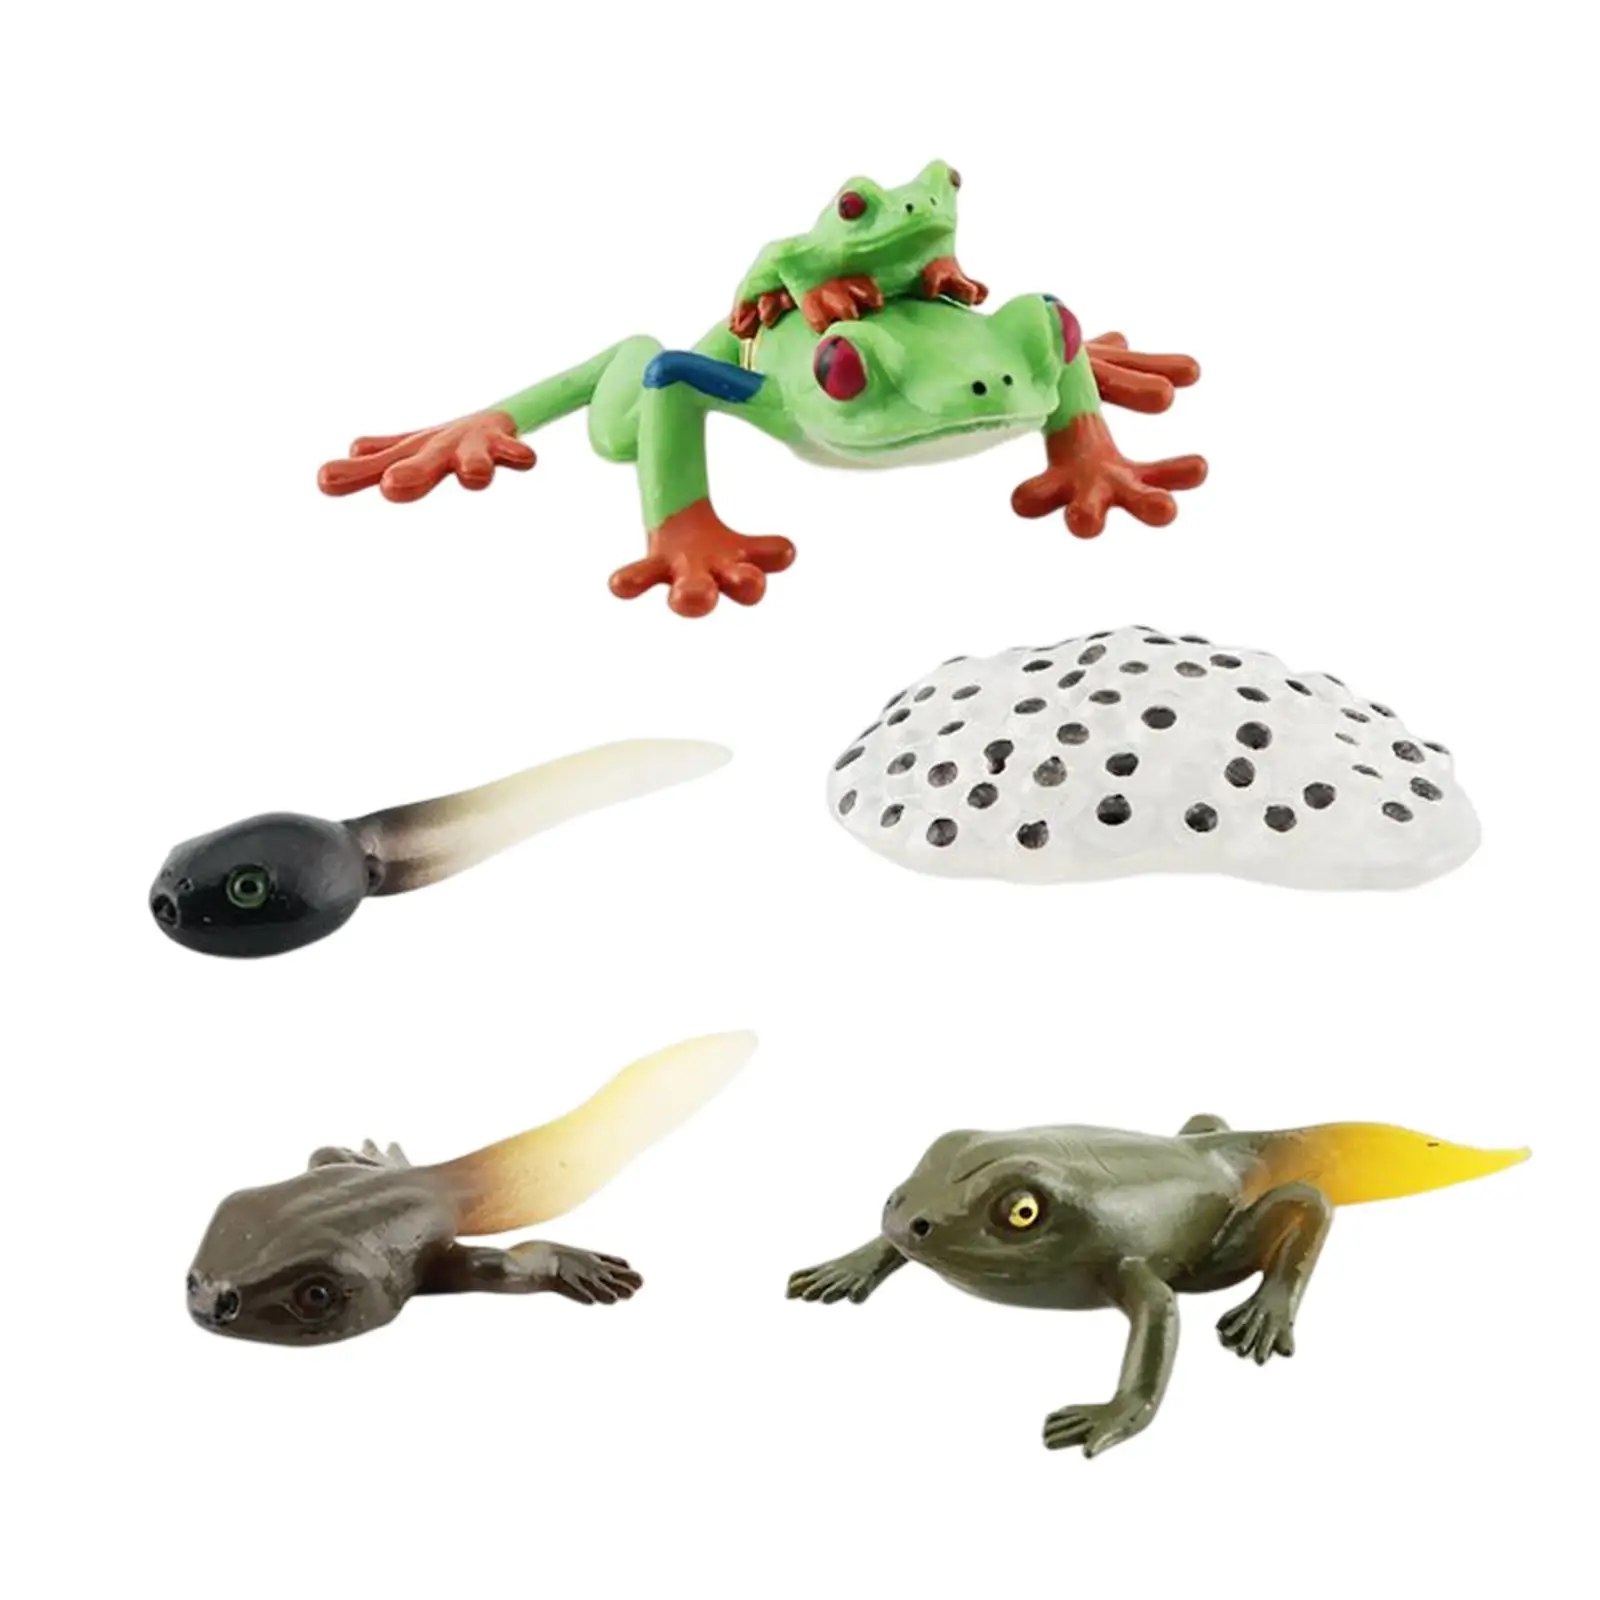 Life Cycle Animal Figures Toy 4 Stages of Frog Frogs Life Cycle Model for Preschool Children Early Educational Development Toys